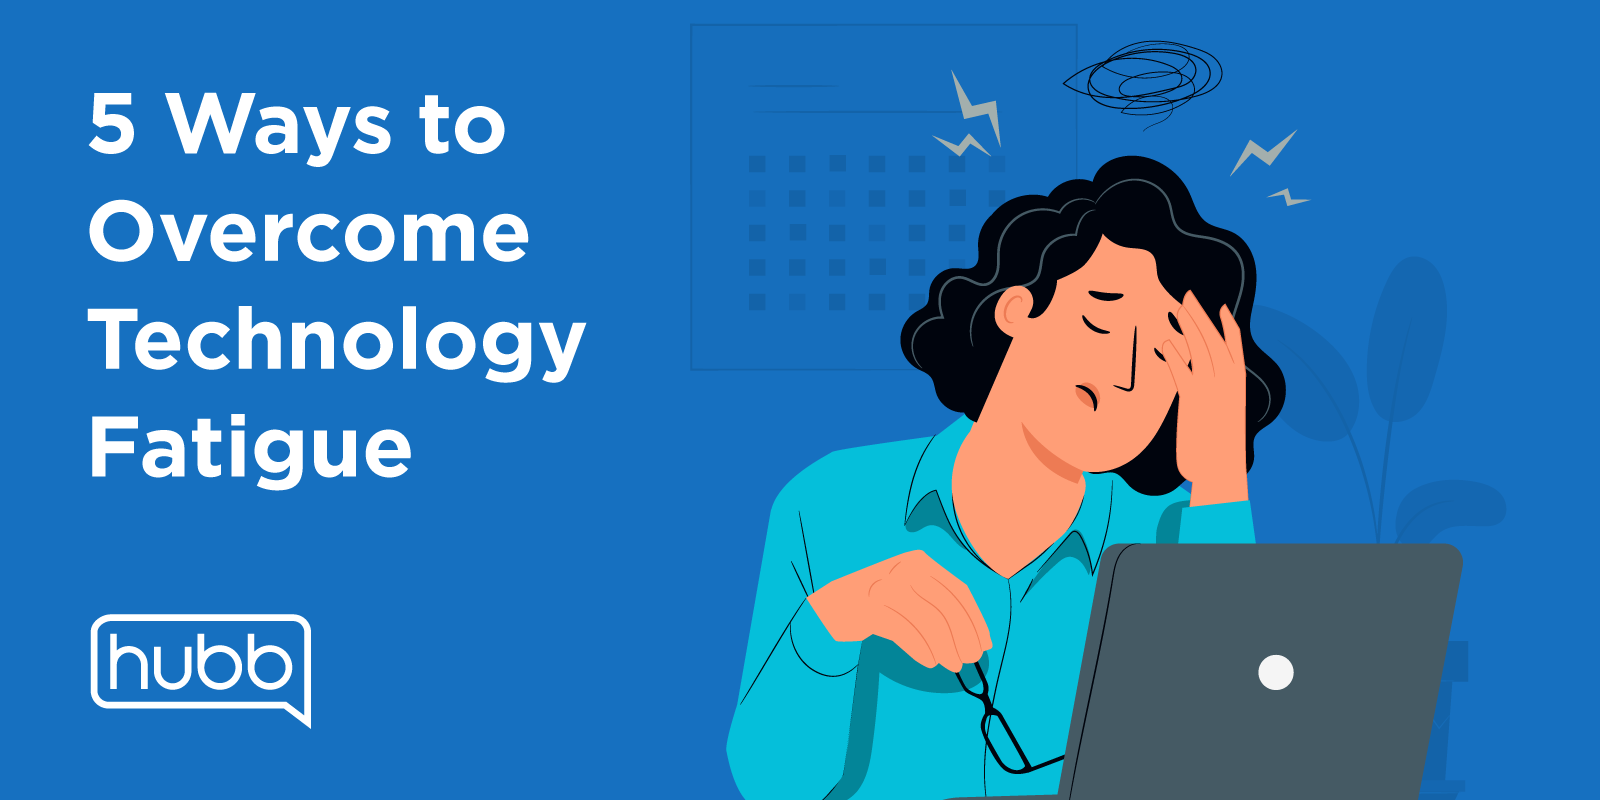 5 Ways to Overcome Technology Fatigue